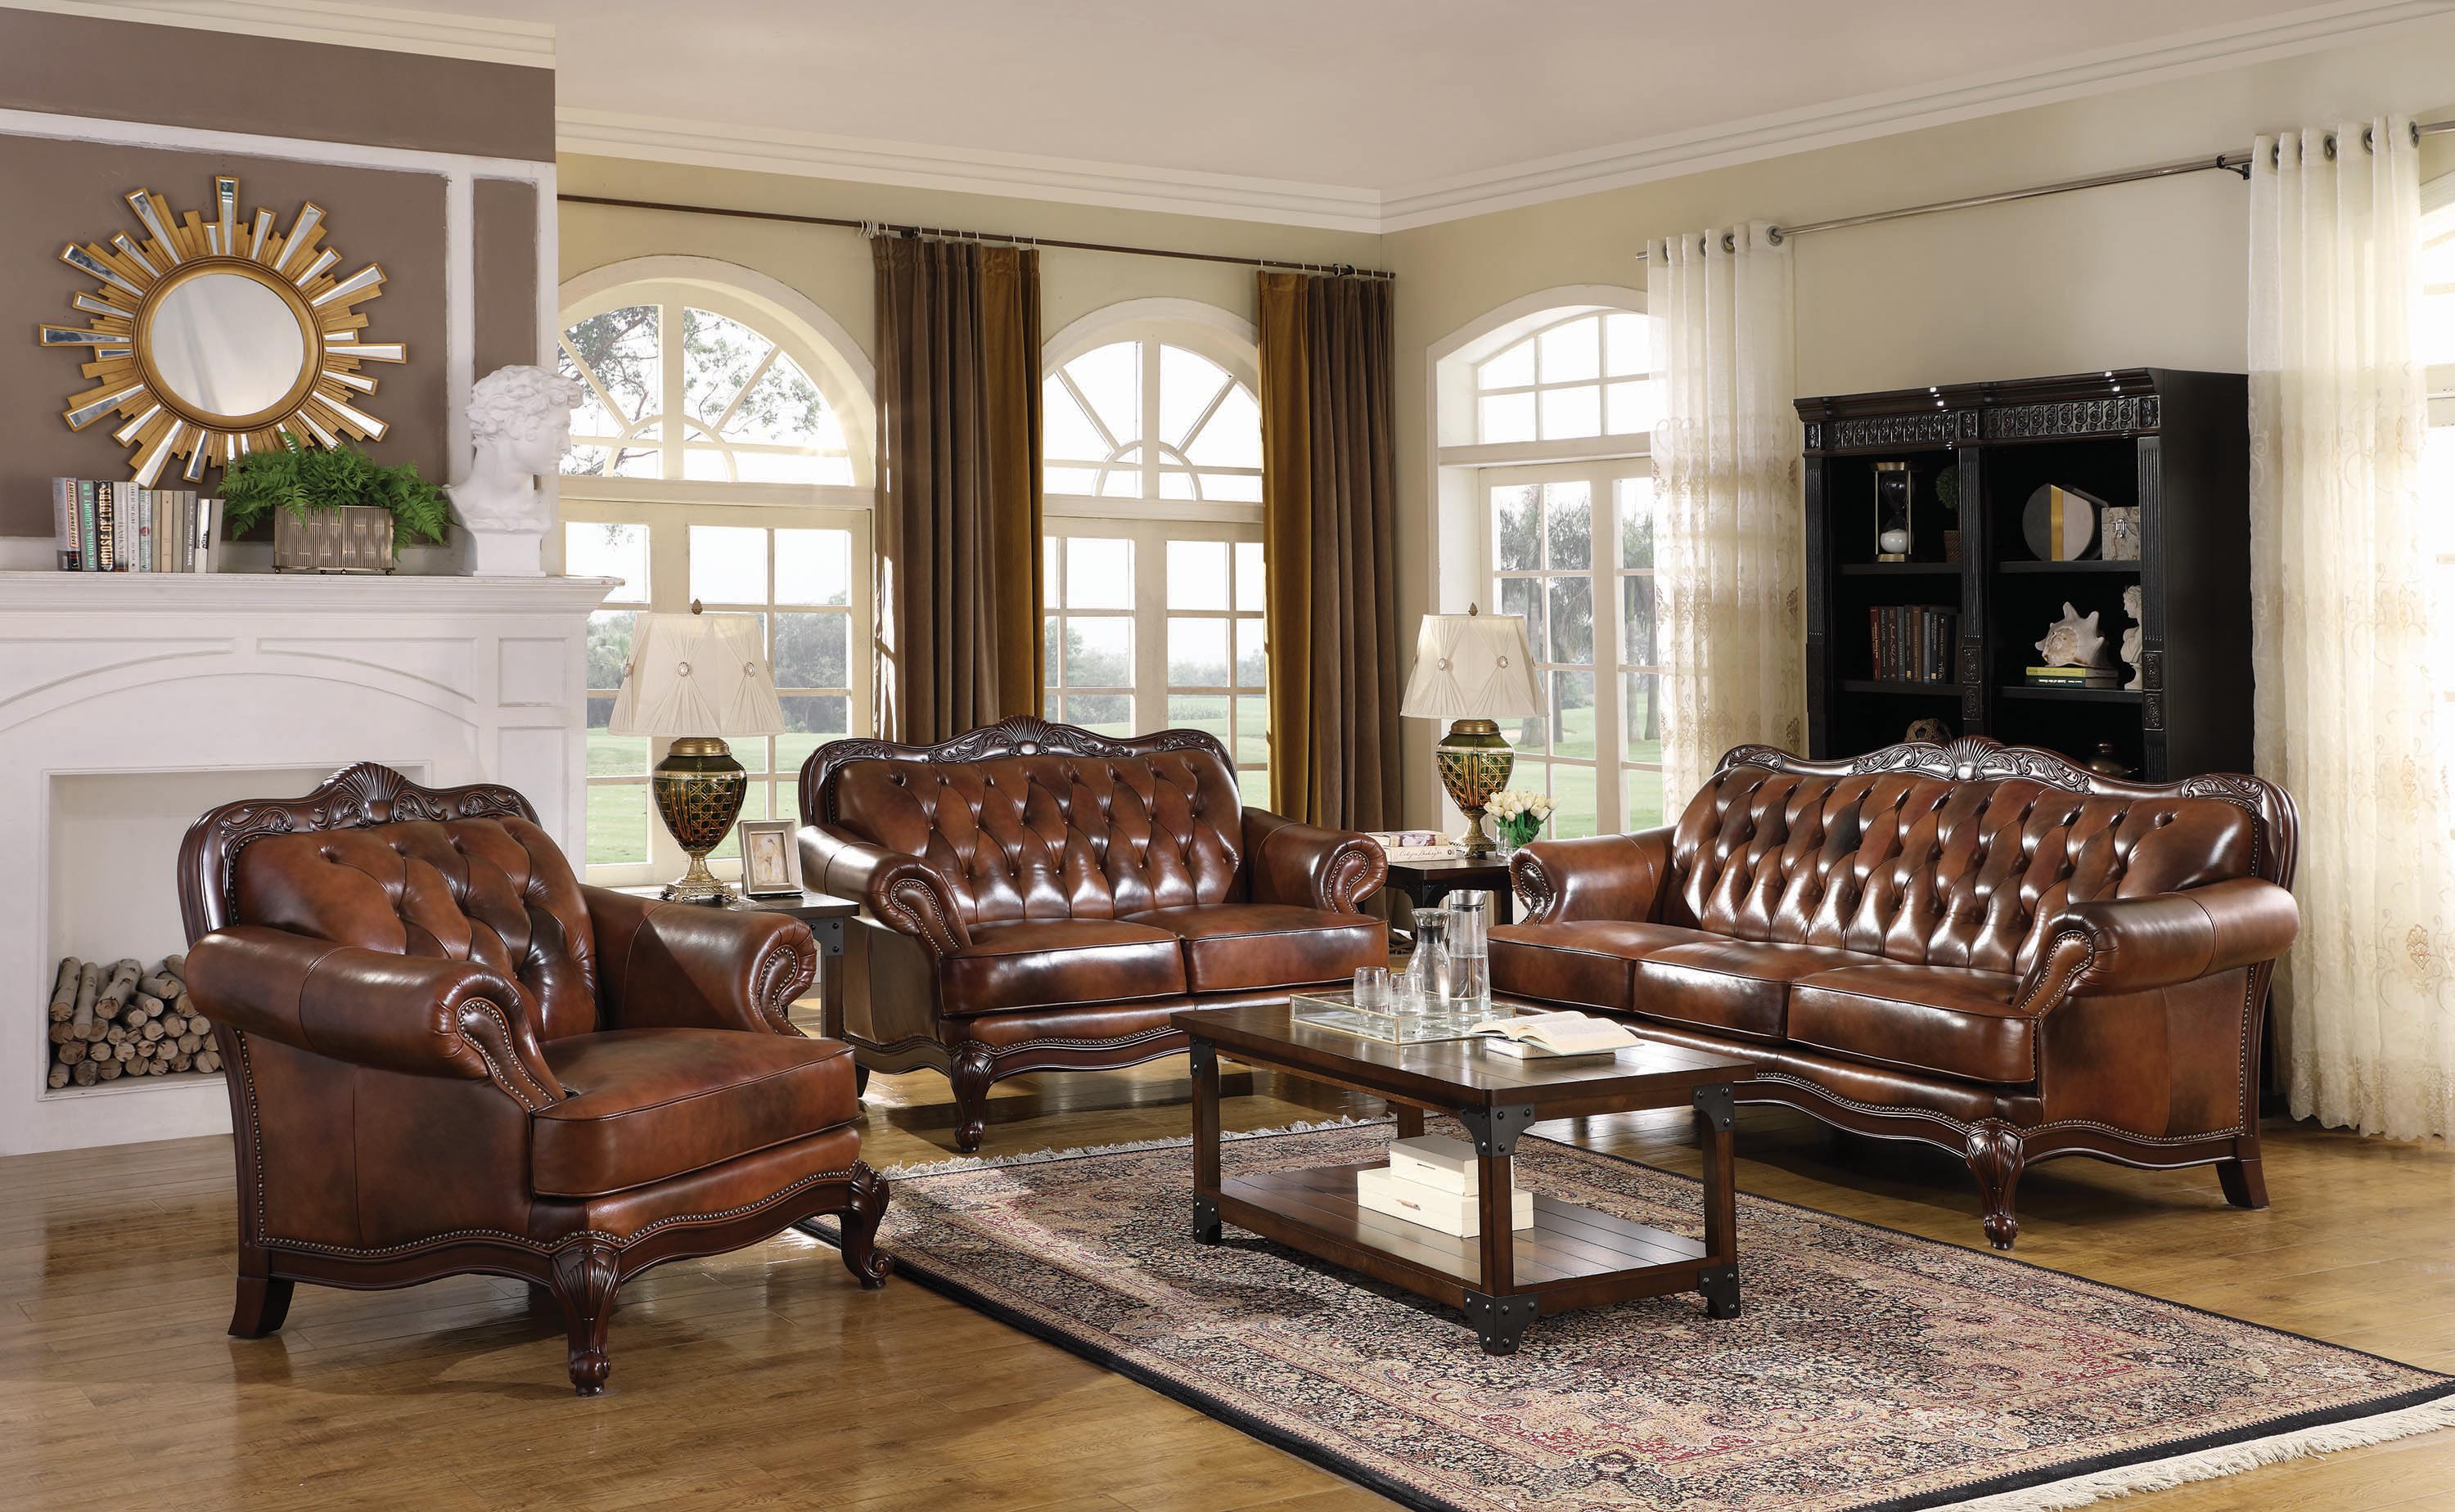 Classic Living Room Set 500681-S3 Victoria 500681-S3 in Brown Leather